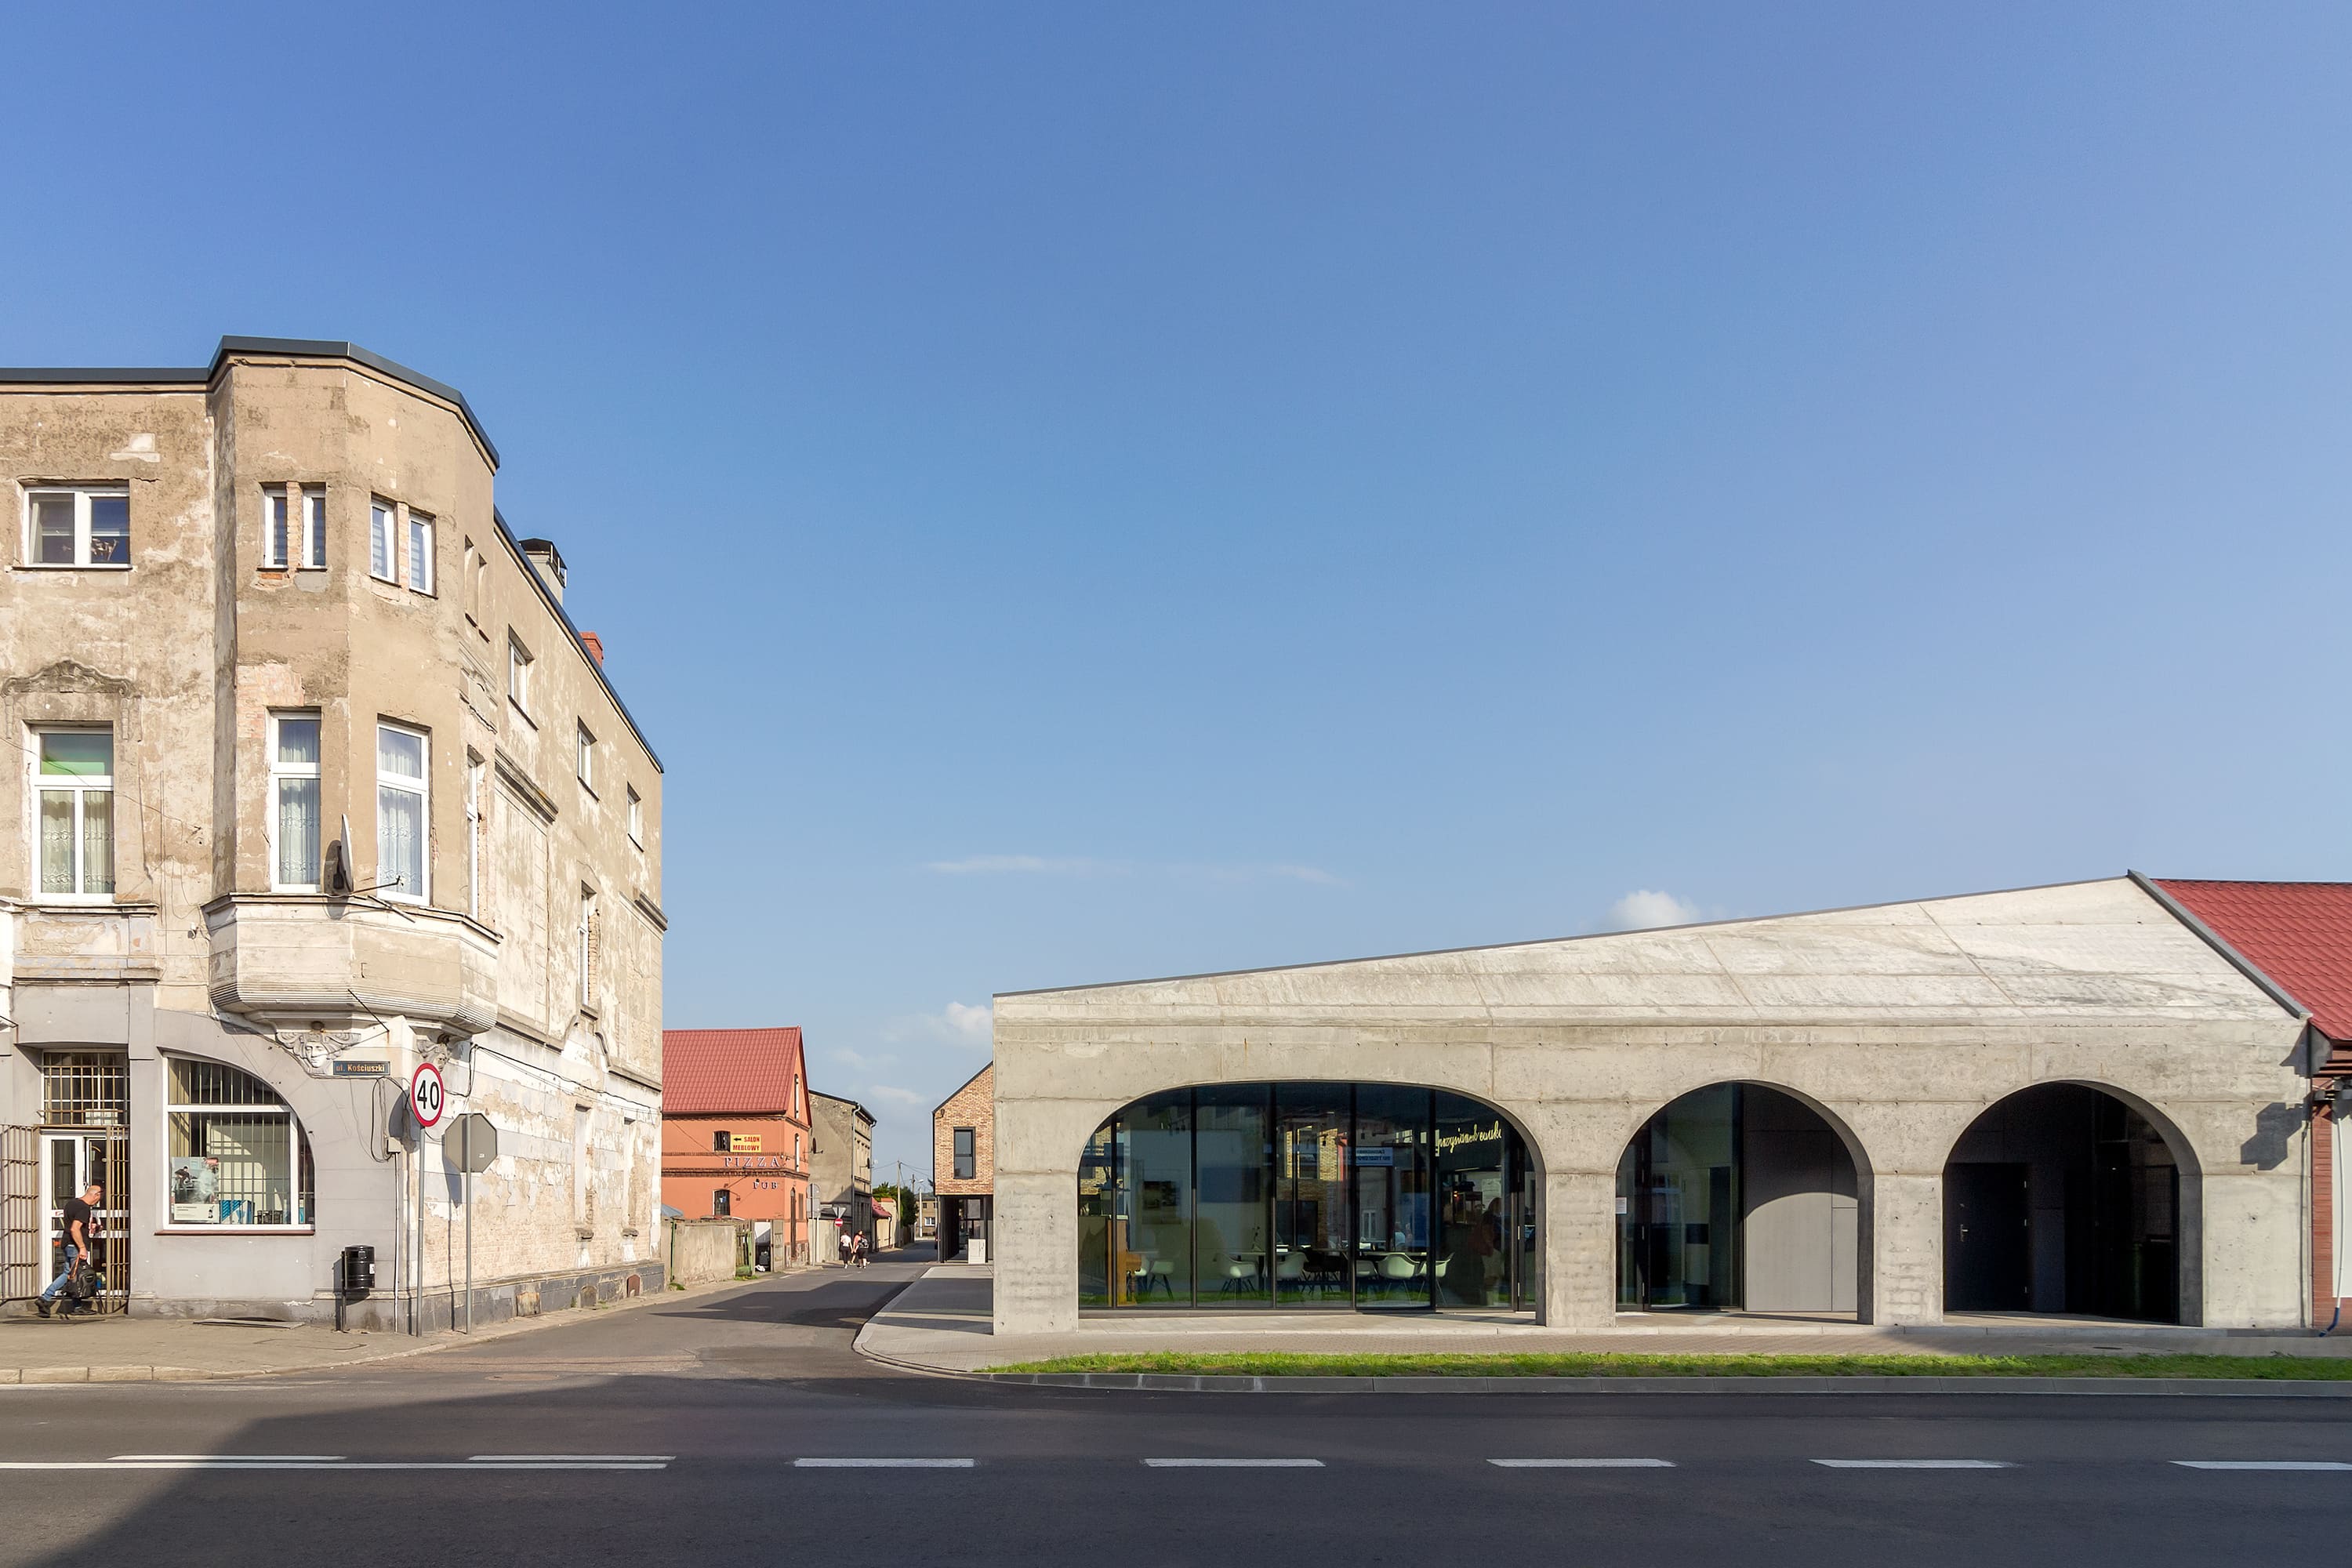 Bus Stop Education Community Center: Quality Space for the City of Wieleń